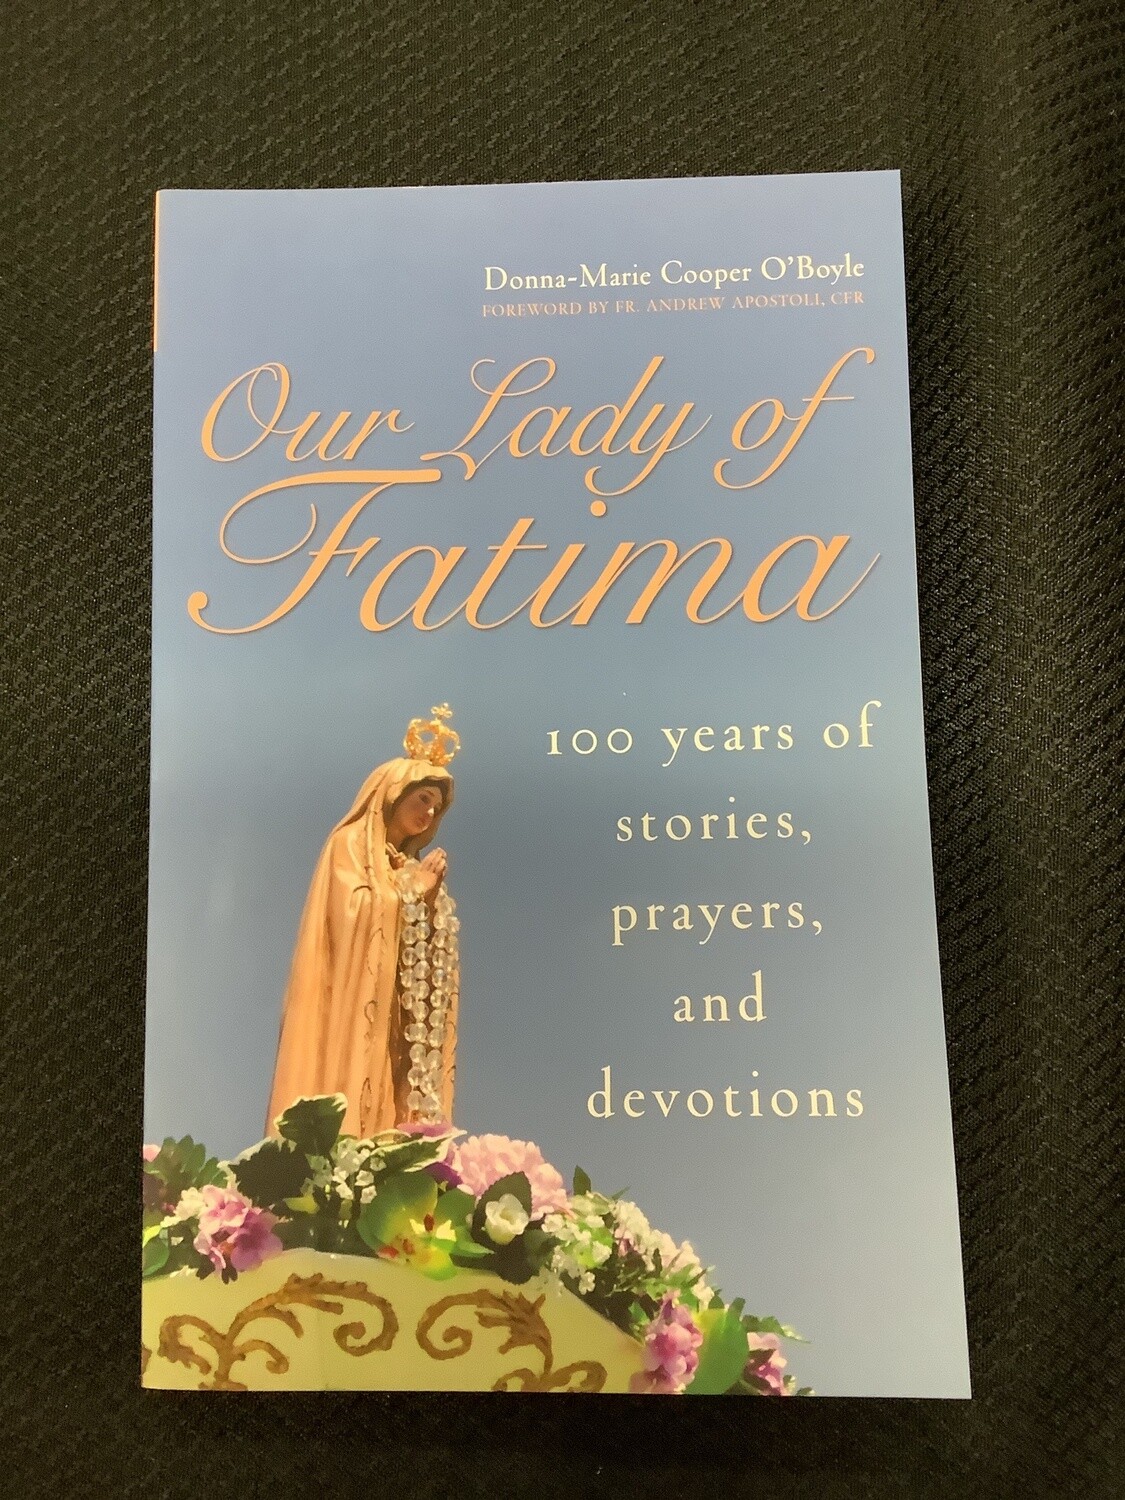 Our Lady Of Fatima 100 Years of Stories, Prayers, and Devotions - Donna-Marie Cooper O’Boyle